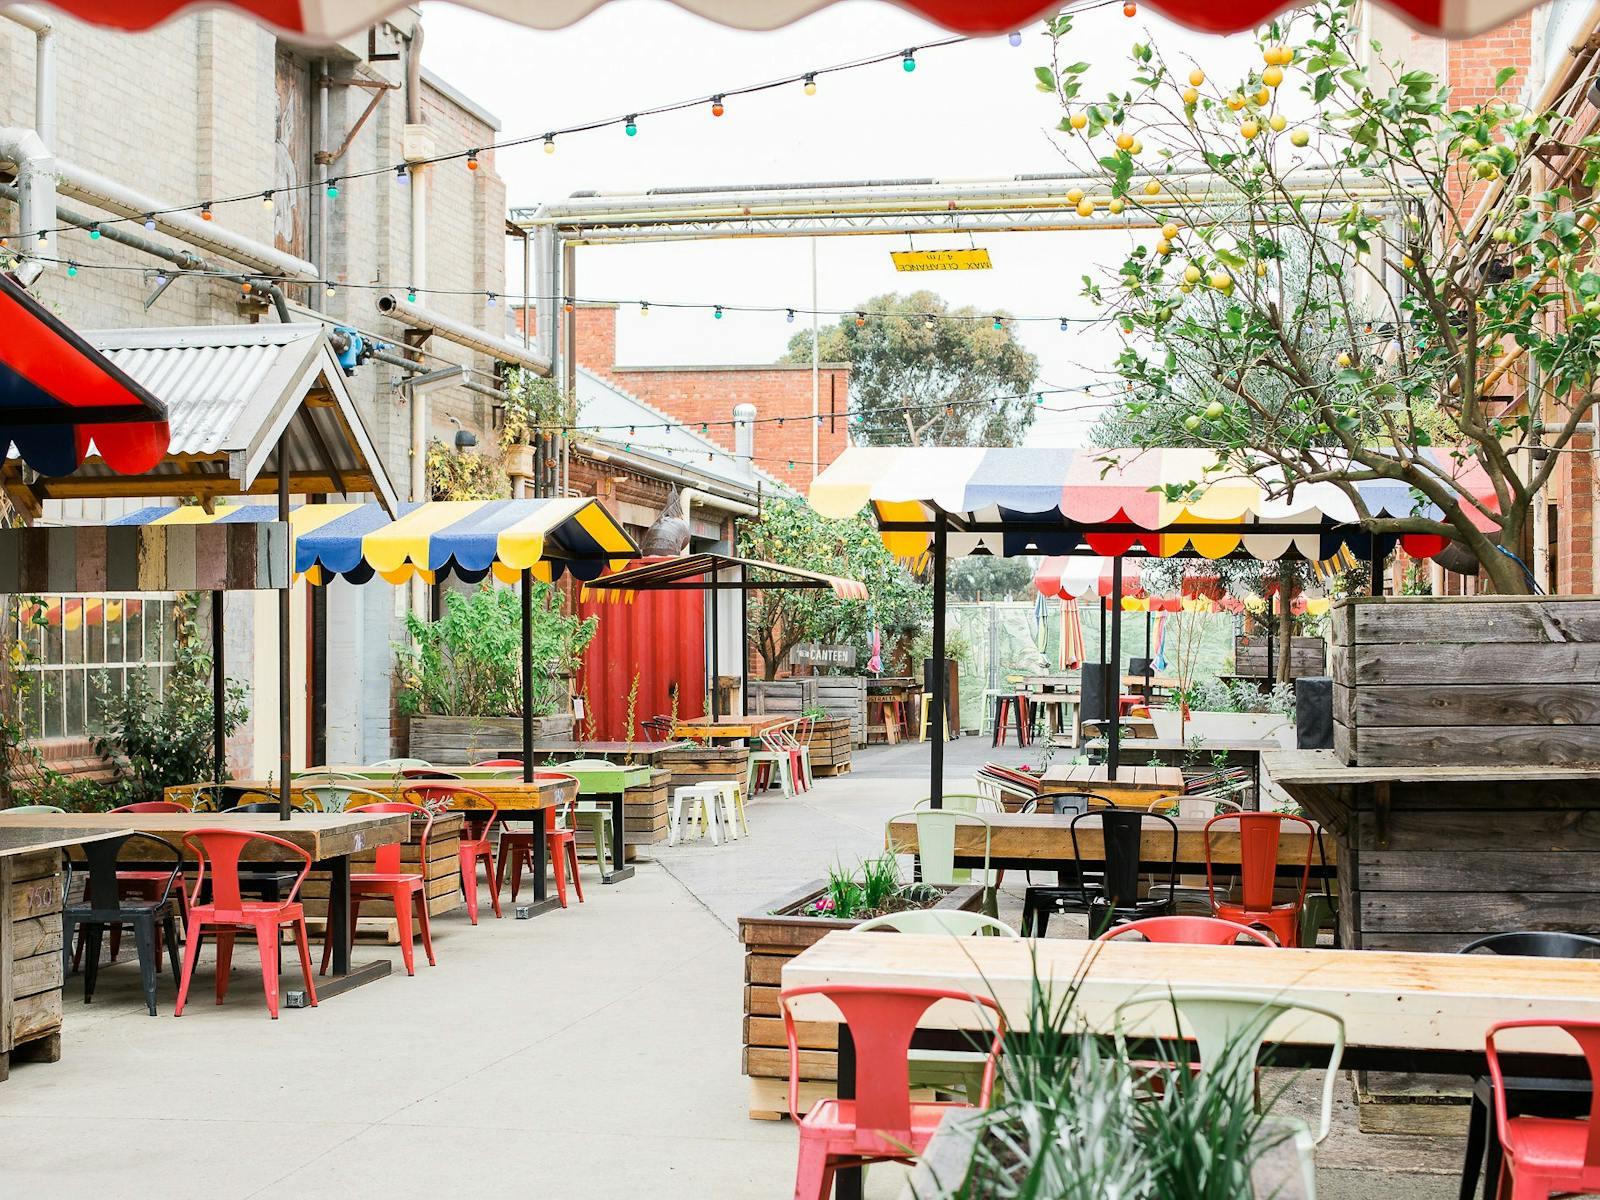 Little Creatures outdoor dining space, with rustic tables and colourful umbrellas in a lane.